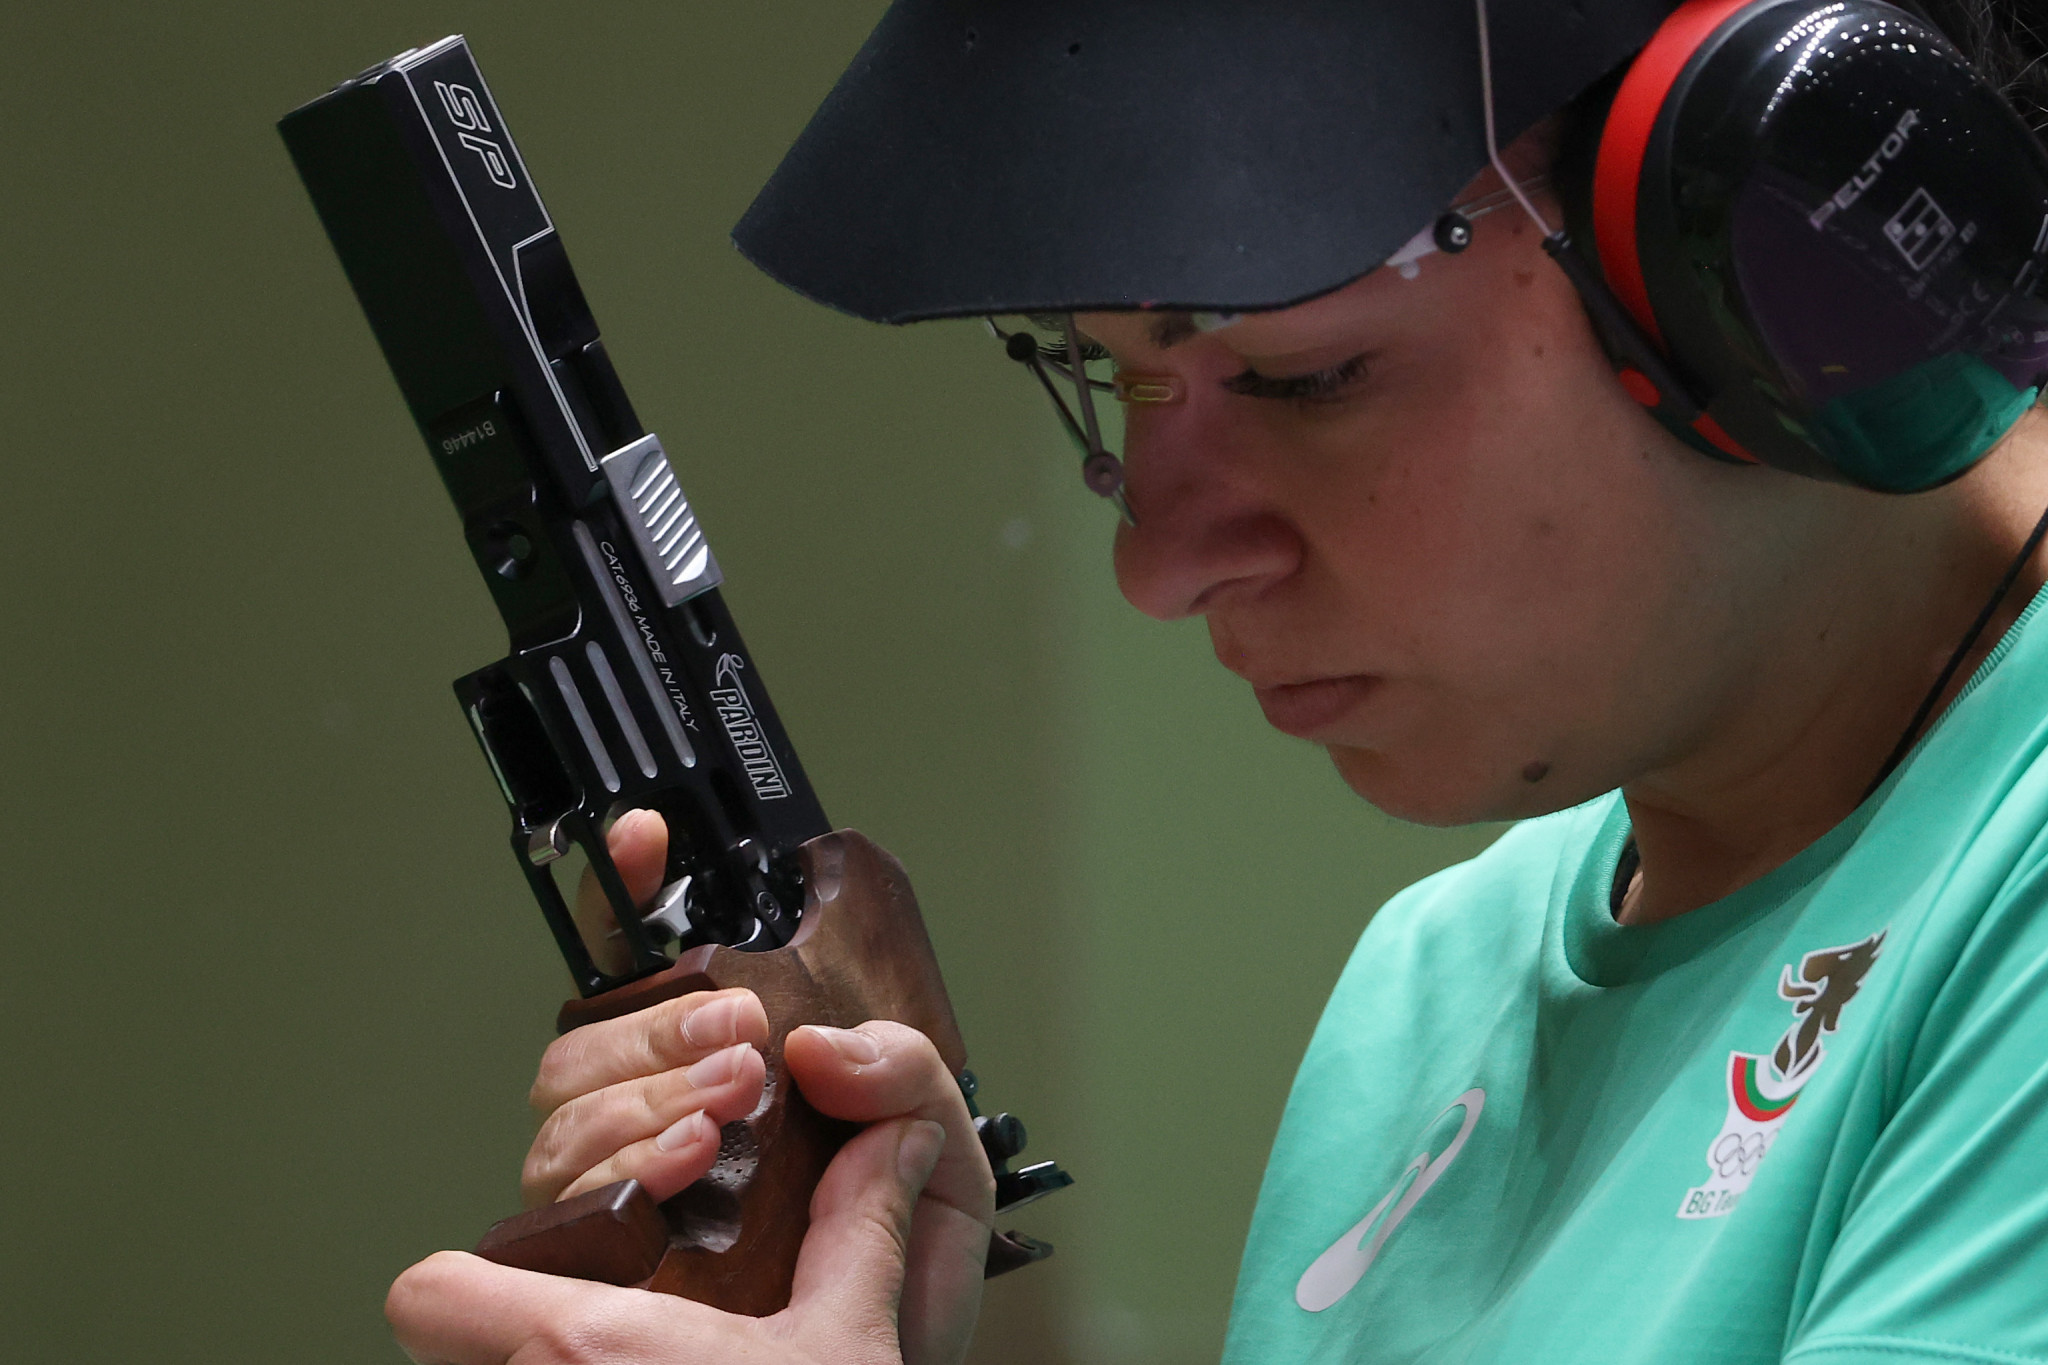 Antoaneta Kostadinova of Bulgaria won gold today at the ISSF World Cup in Baku ©Getty Images